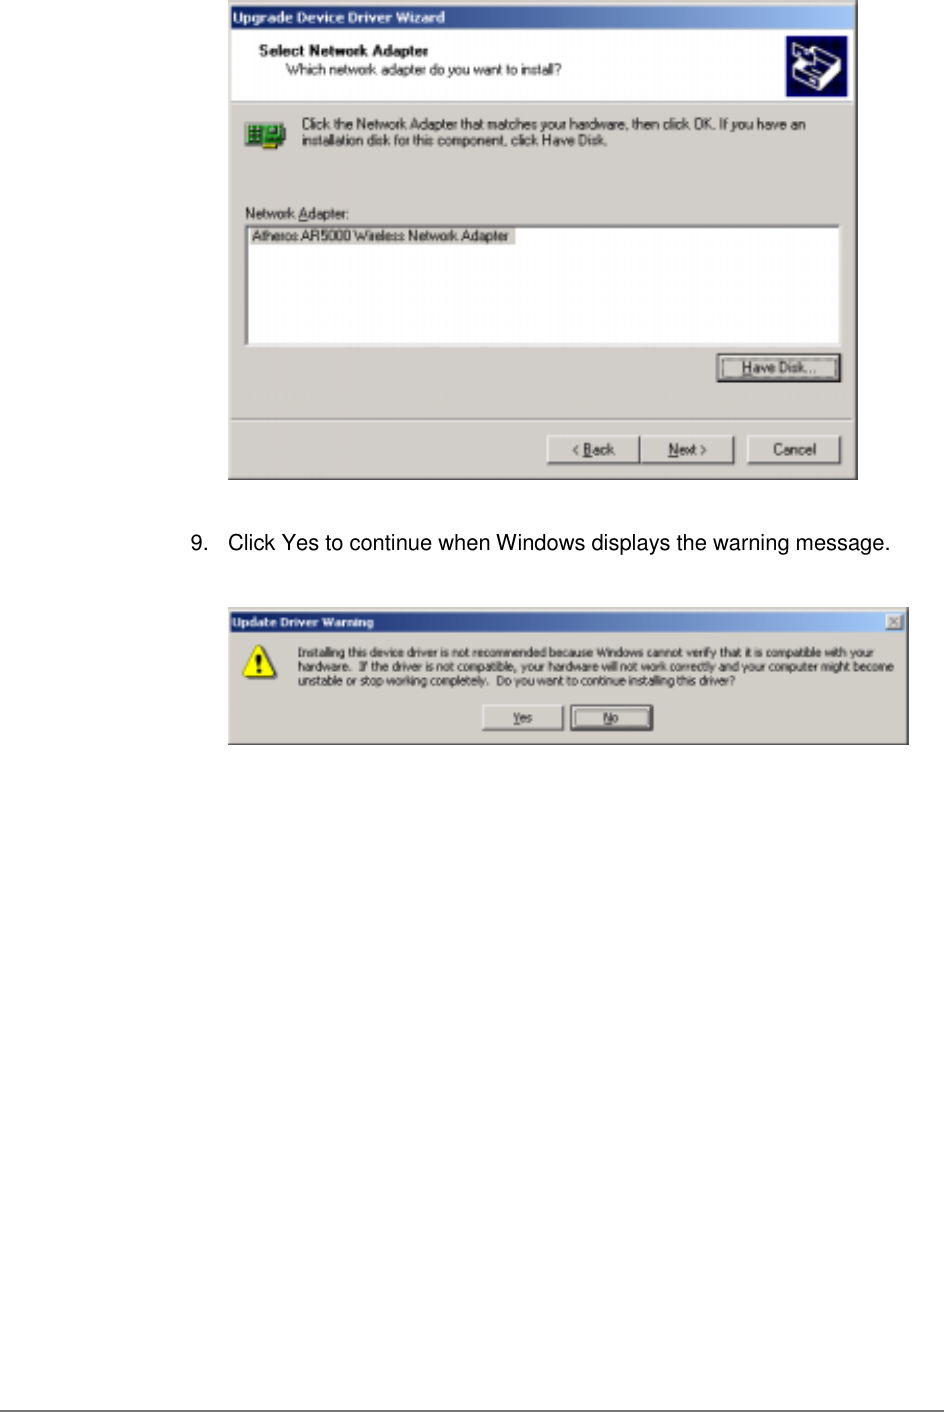 9.  Click Yes to continue when Windows displays the warning message.